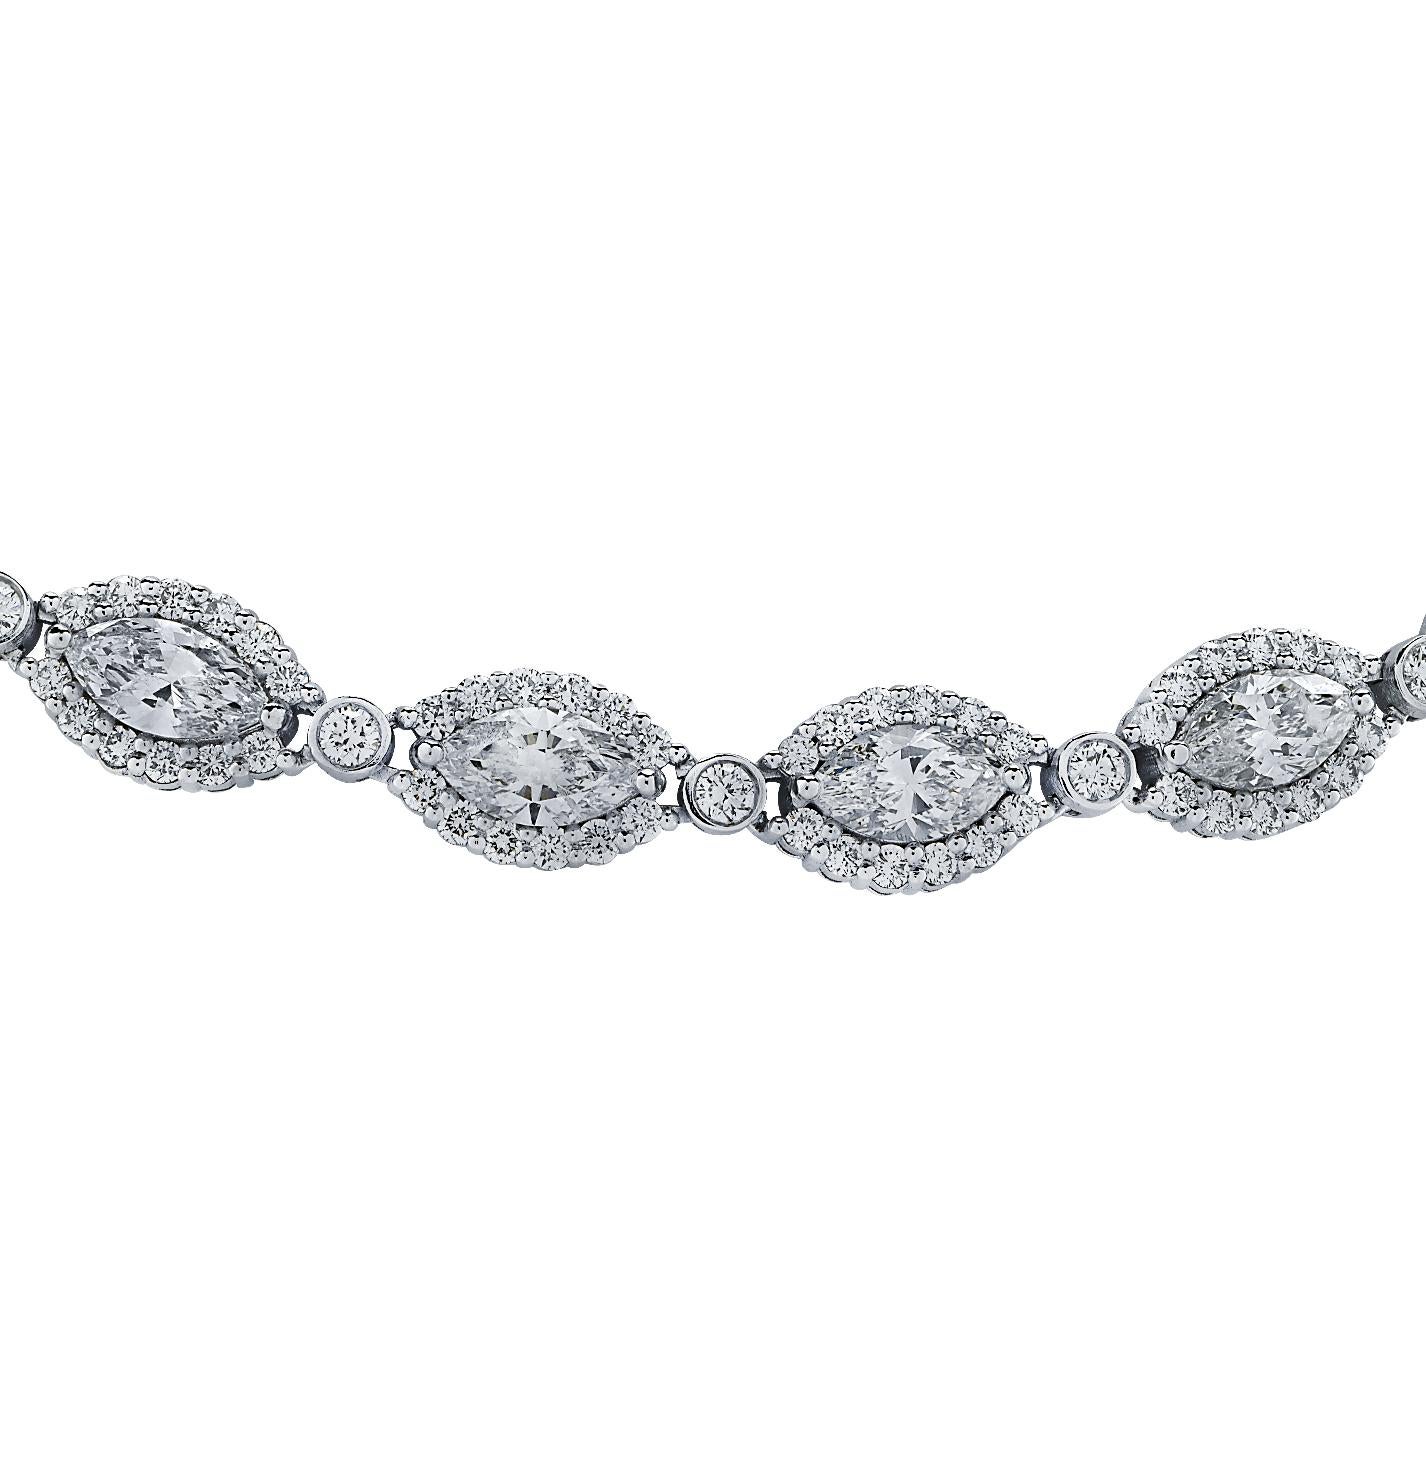 A luxurious necklace, creating striking constellation of light all throughout. Crafted in platinum, and an assemblage of 33 marquise diamonds, weighing approximately 19.63 carats total, J color, VS-SI clarity, each haloed with 12 round diamonds and